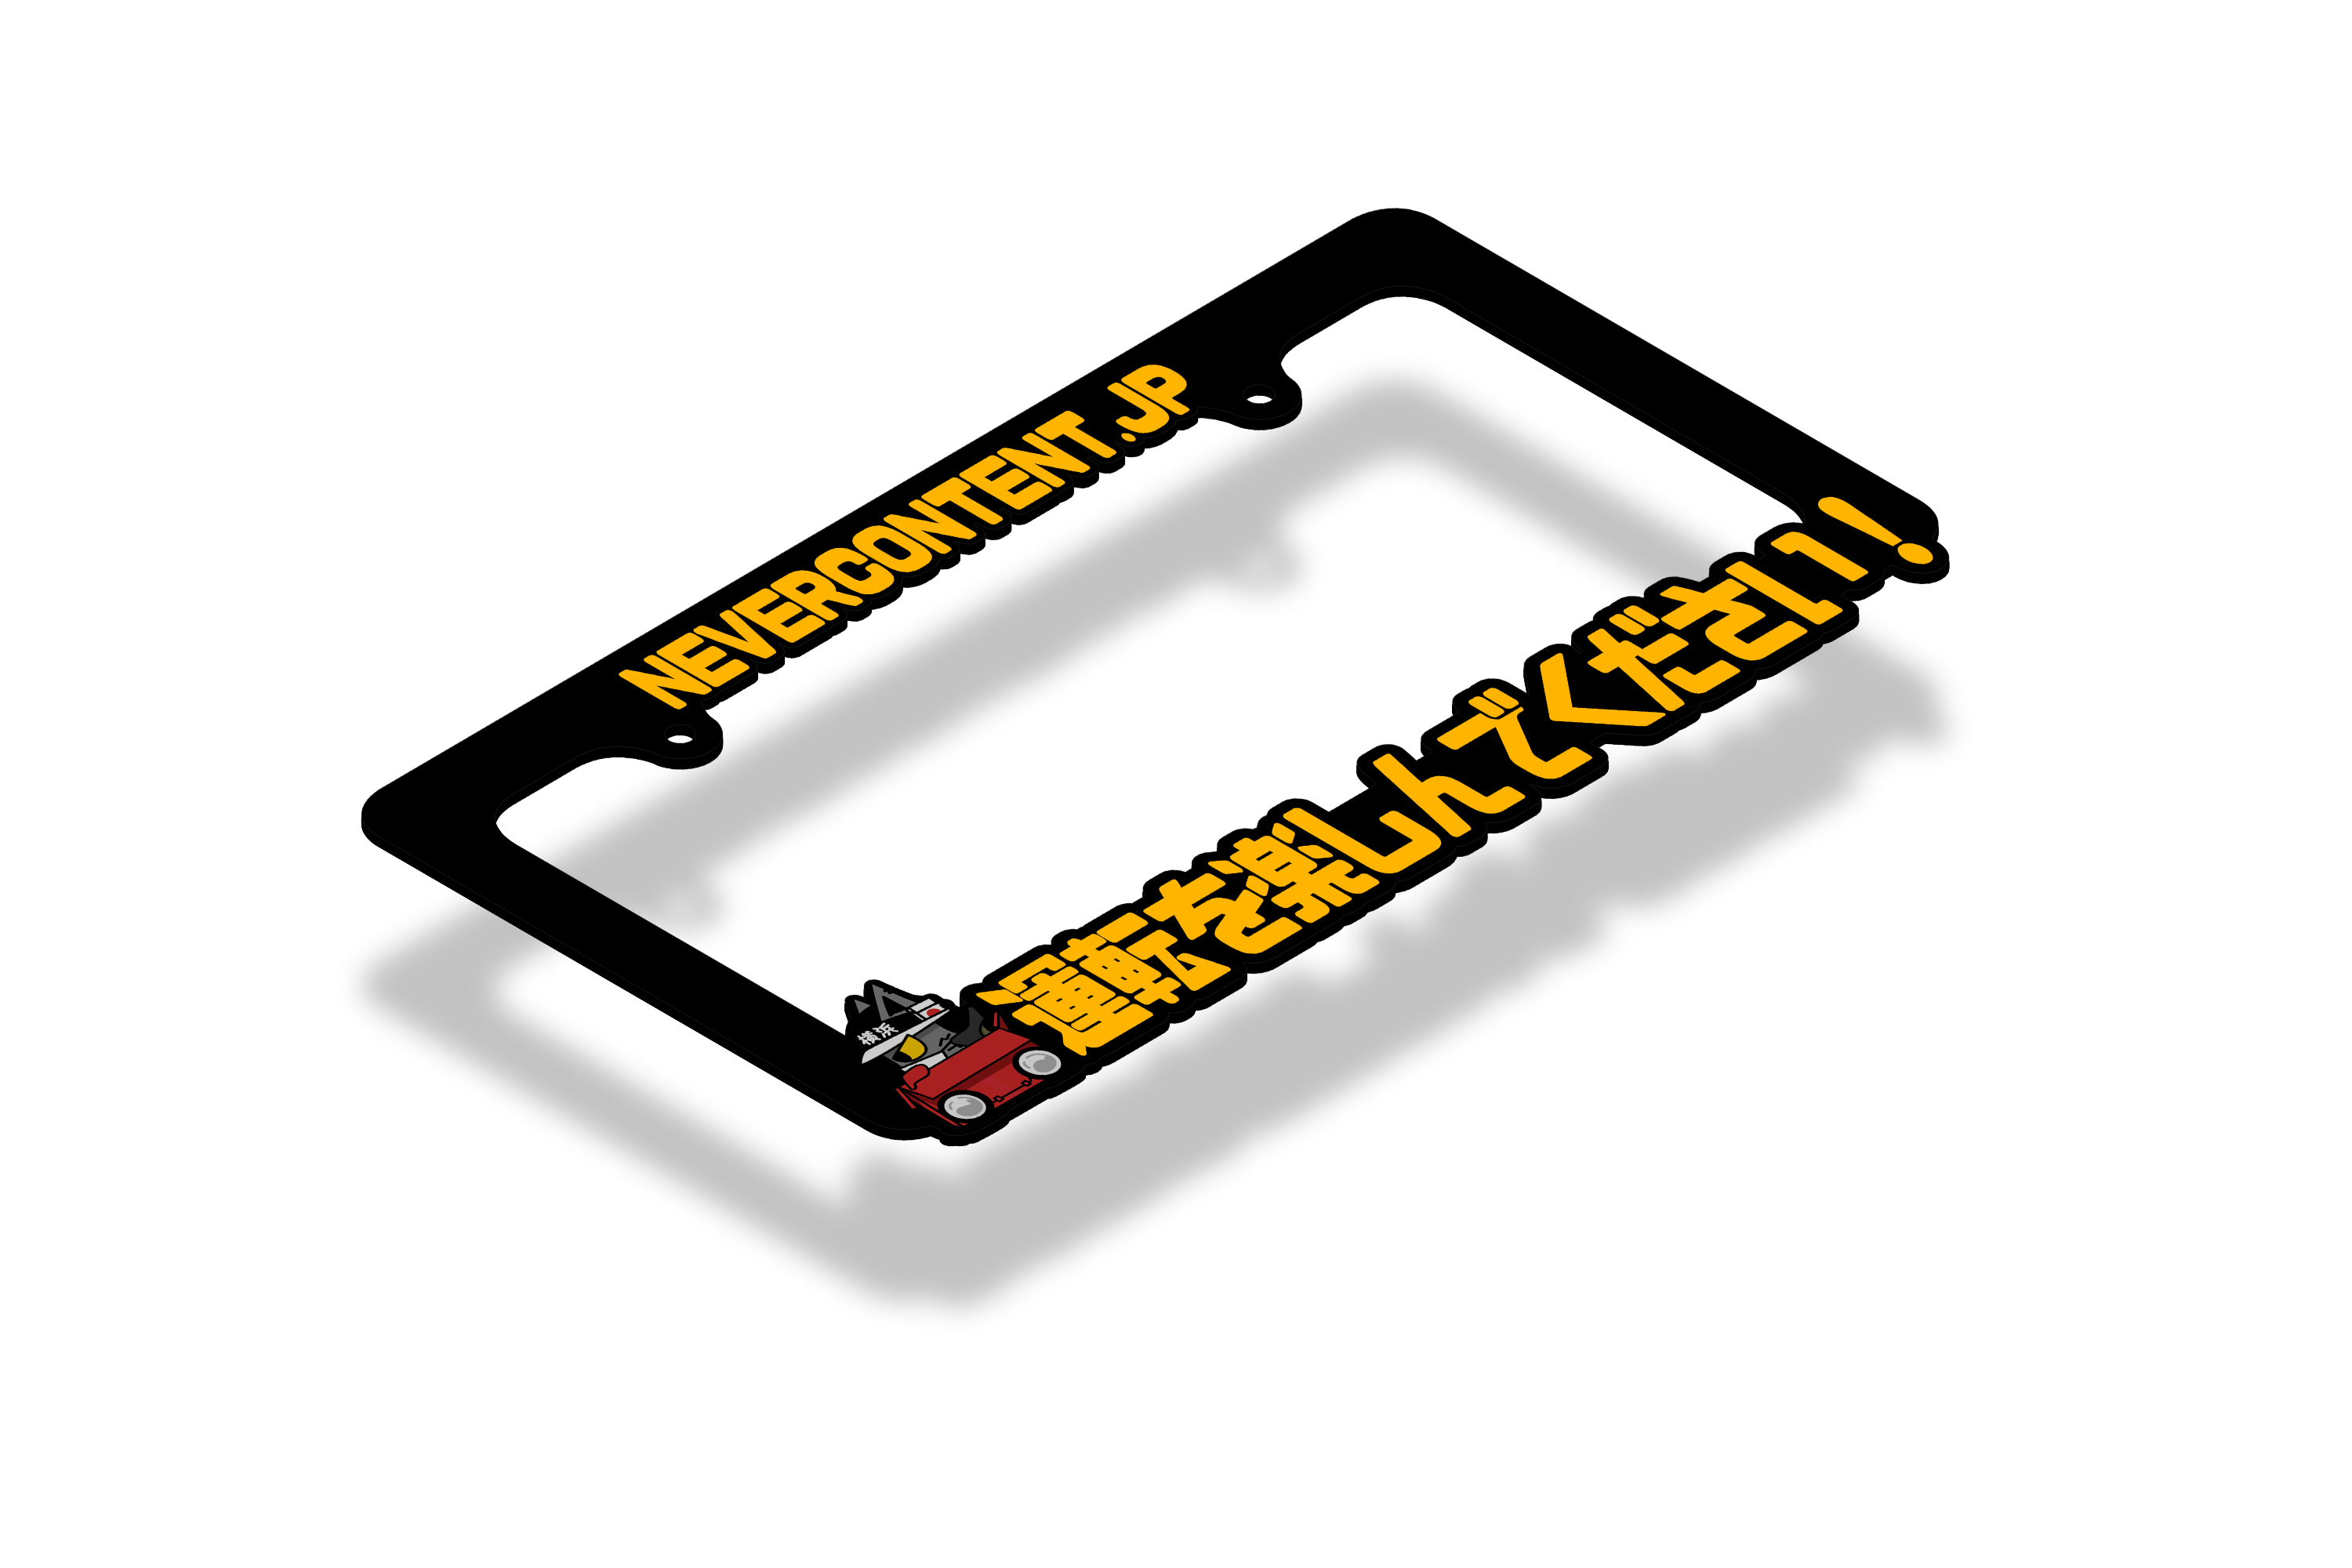 Enjoy The Ride!「Box Cat」 - License Plate Frame (YELLOW)